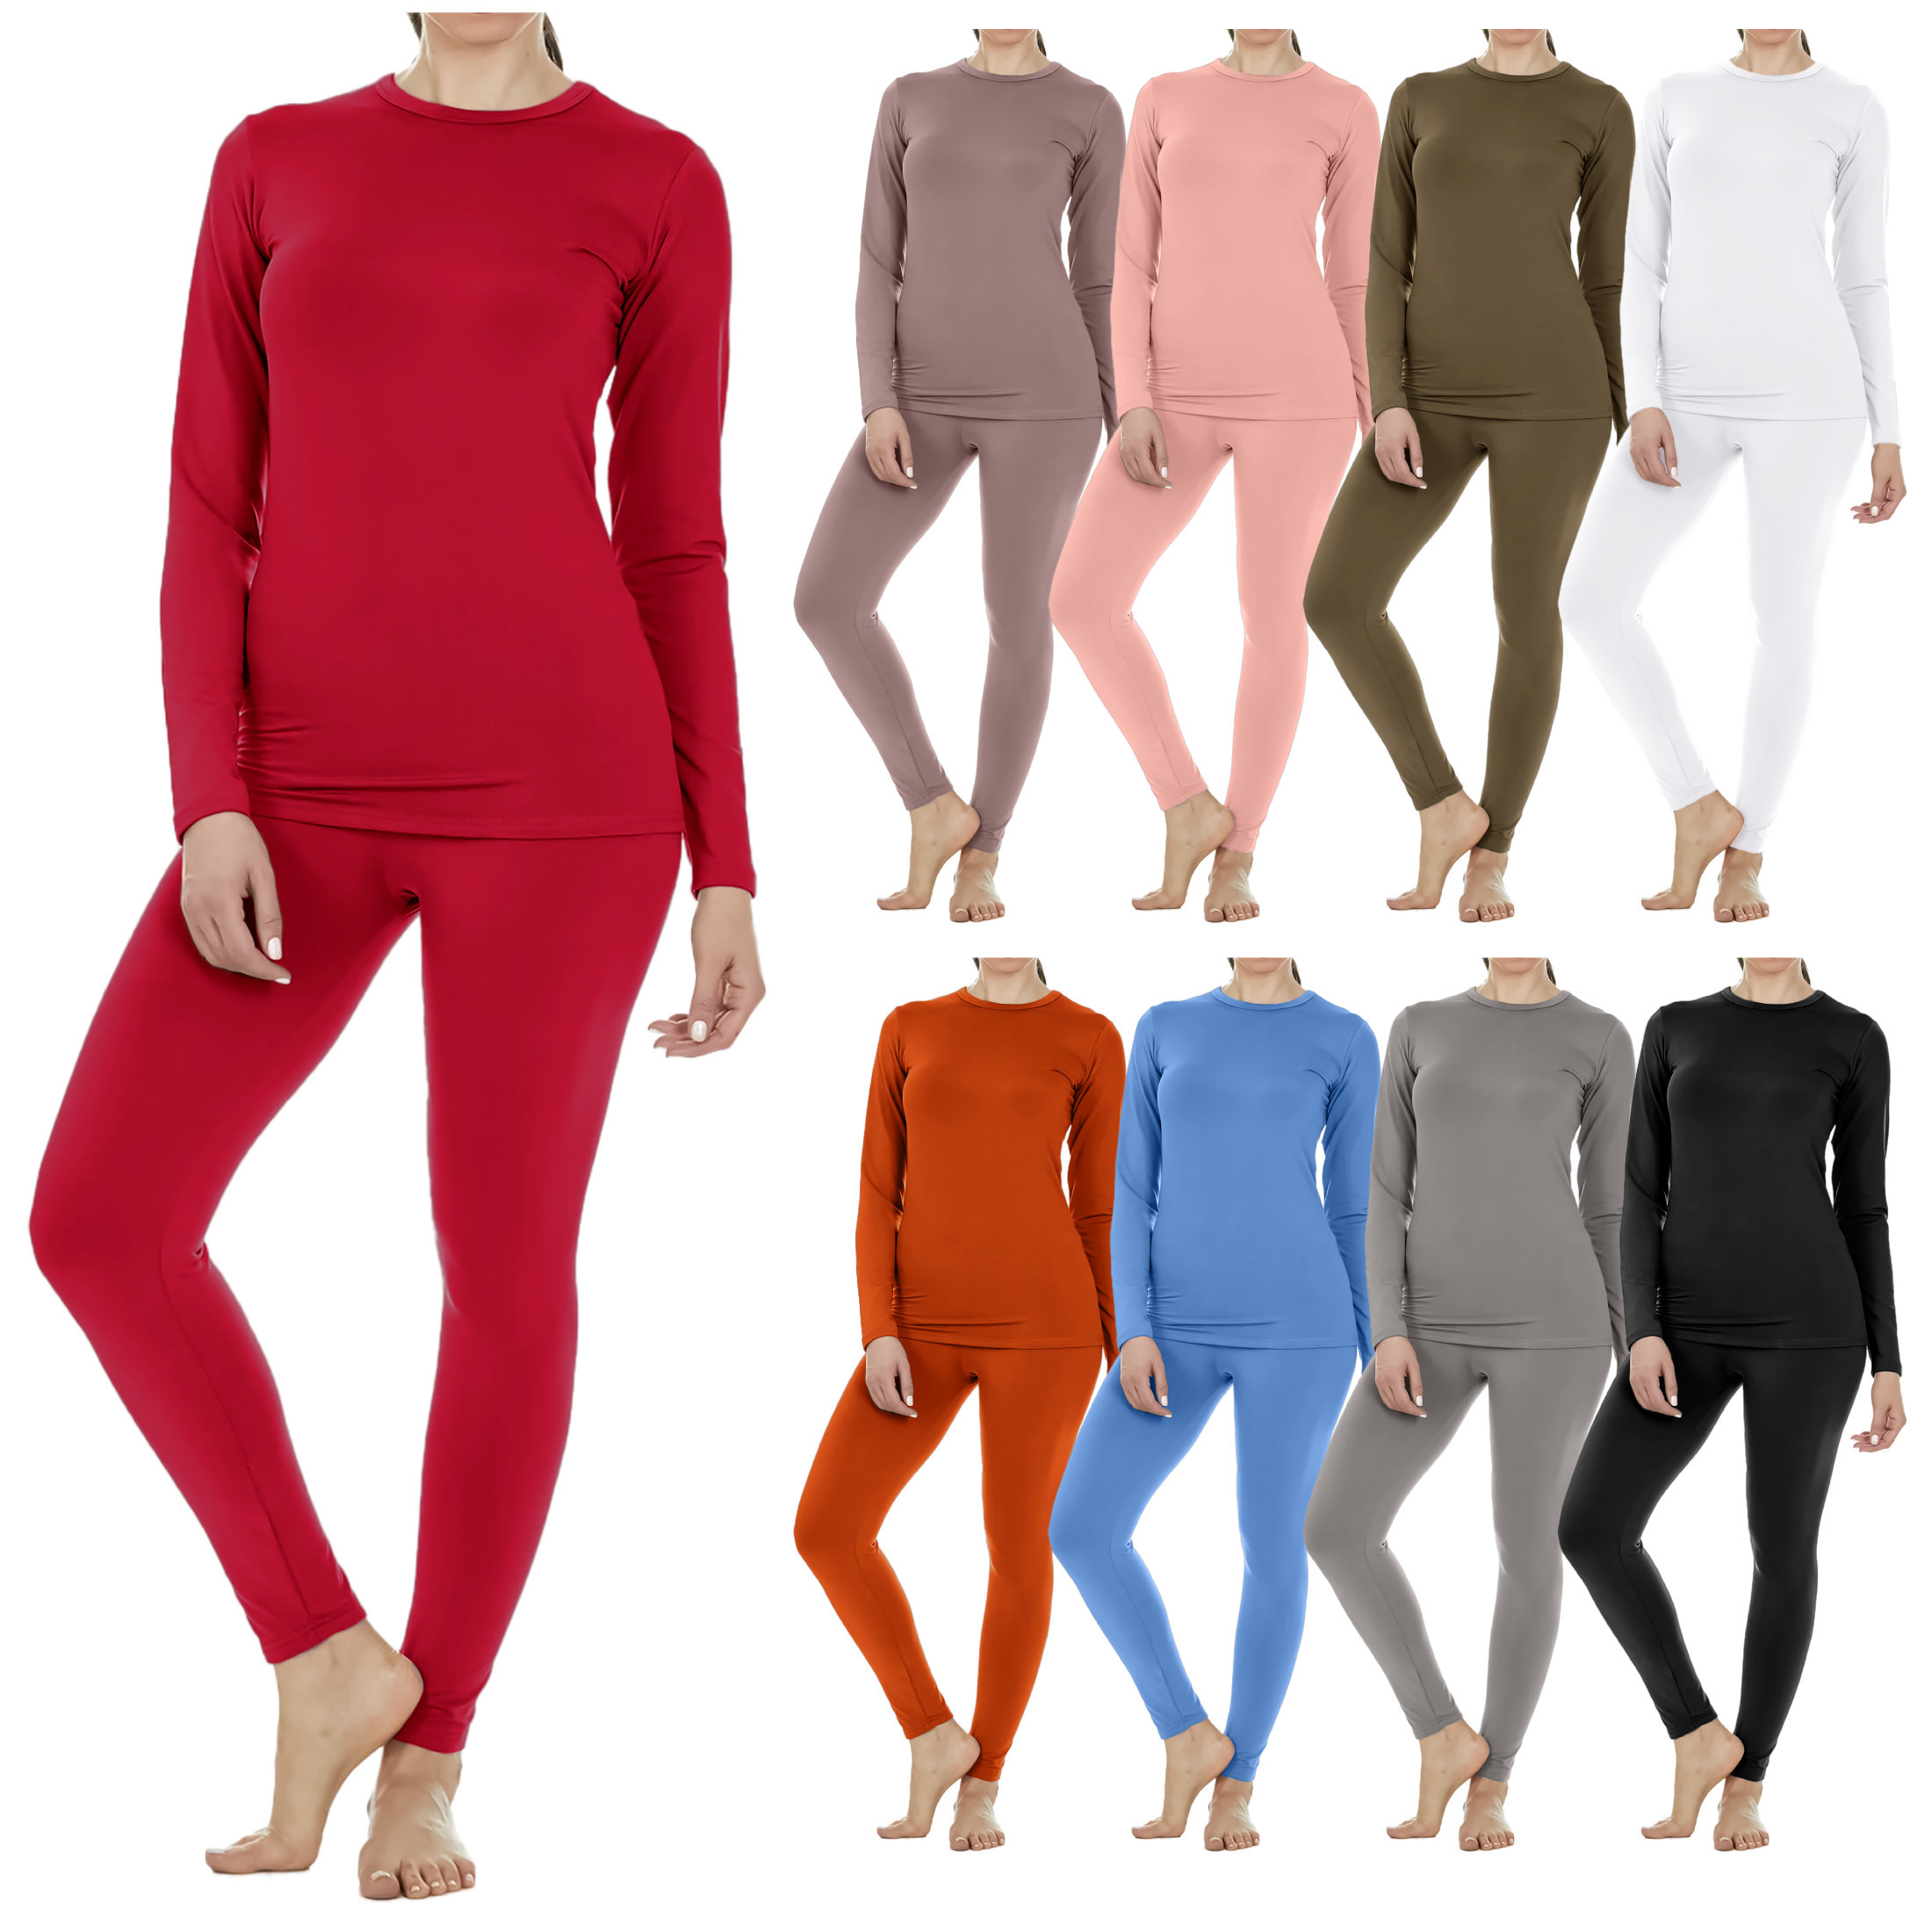 3 Sets: Women's Fleece Lined Thermal Sets For Cold Weather - Large